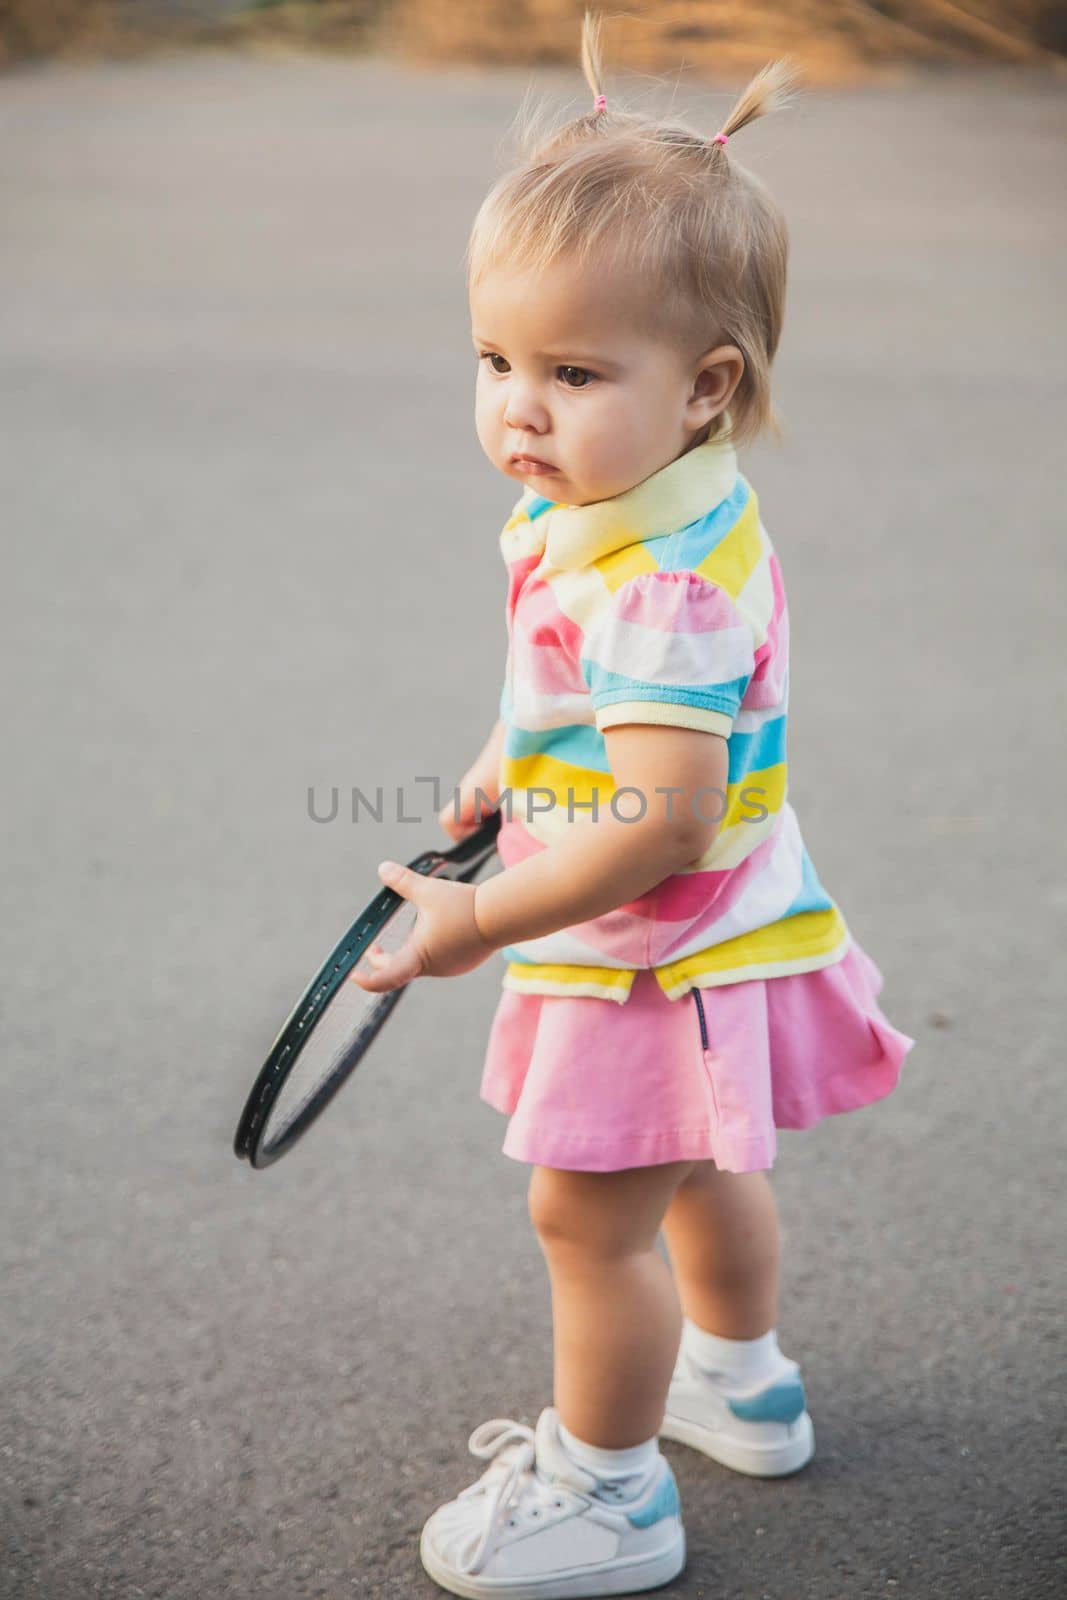 charming little tennis player with a racket.